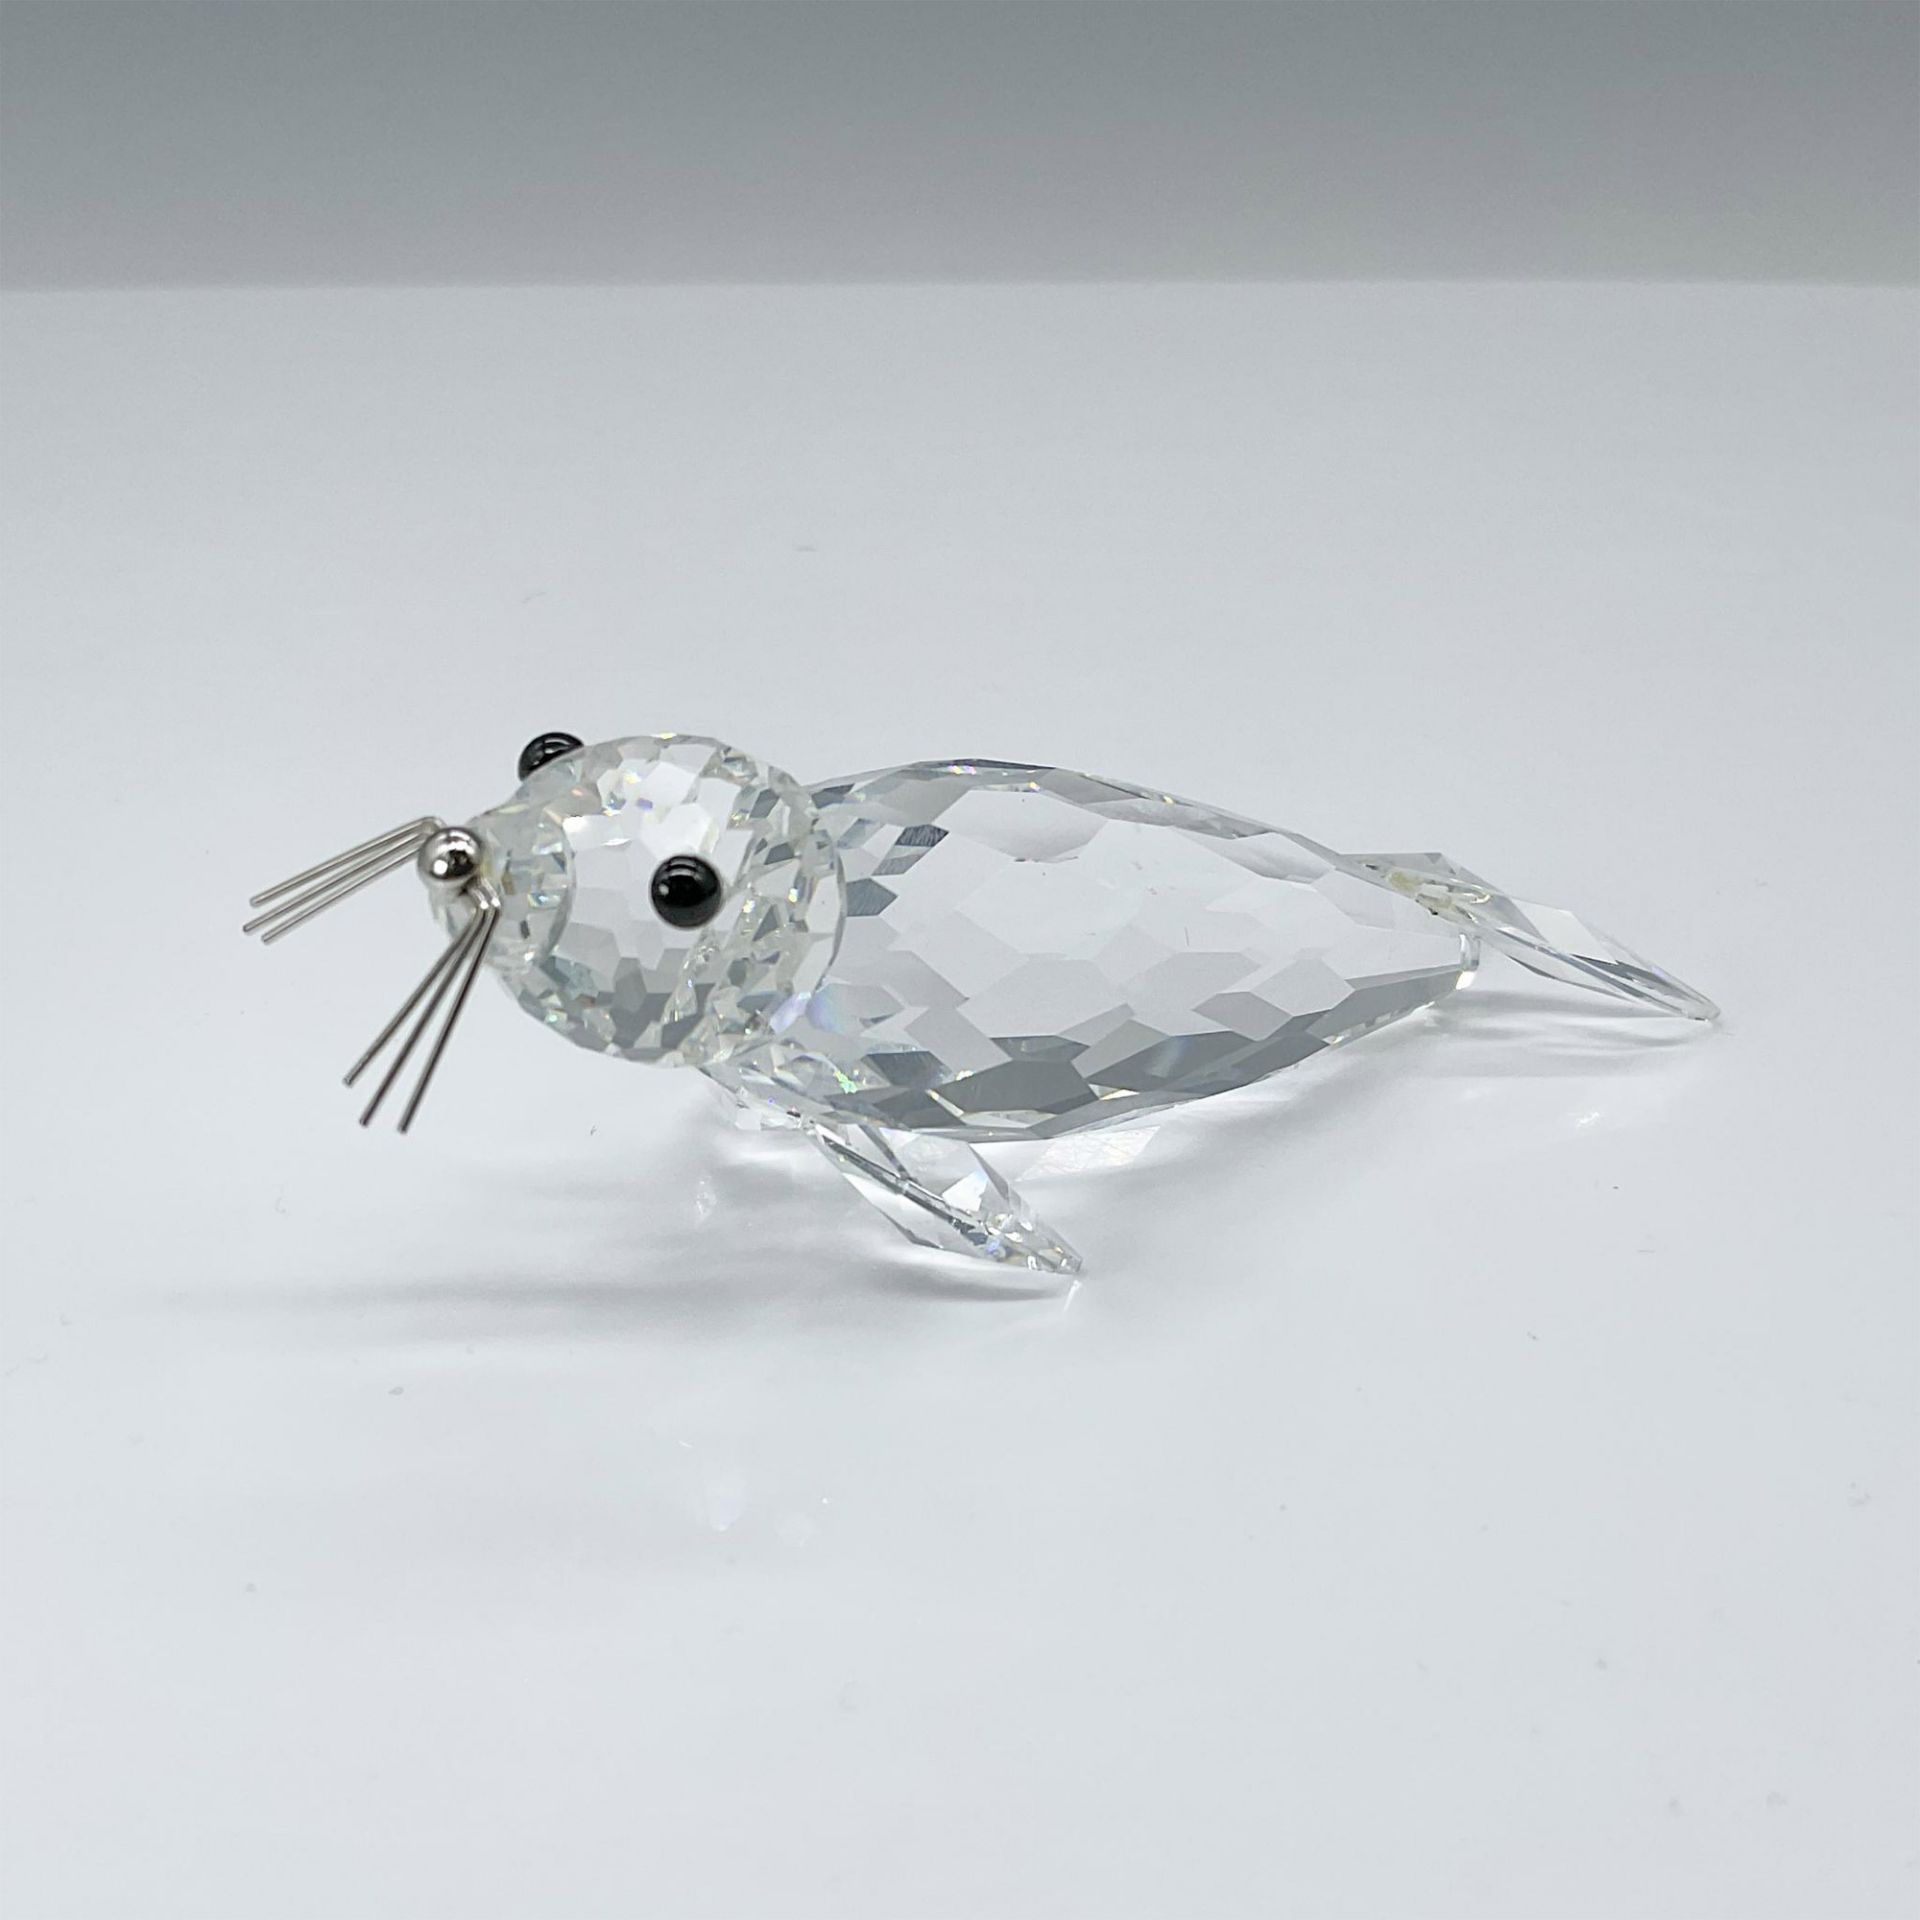 Swarovski Silver Crystal Figurine, Seal with Silver Whiskers - Image 2 of 4